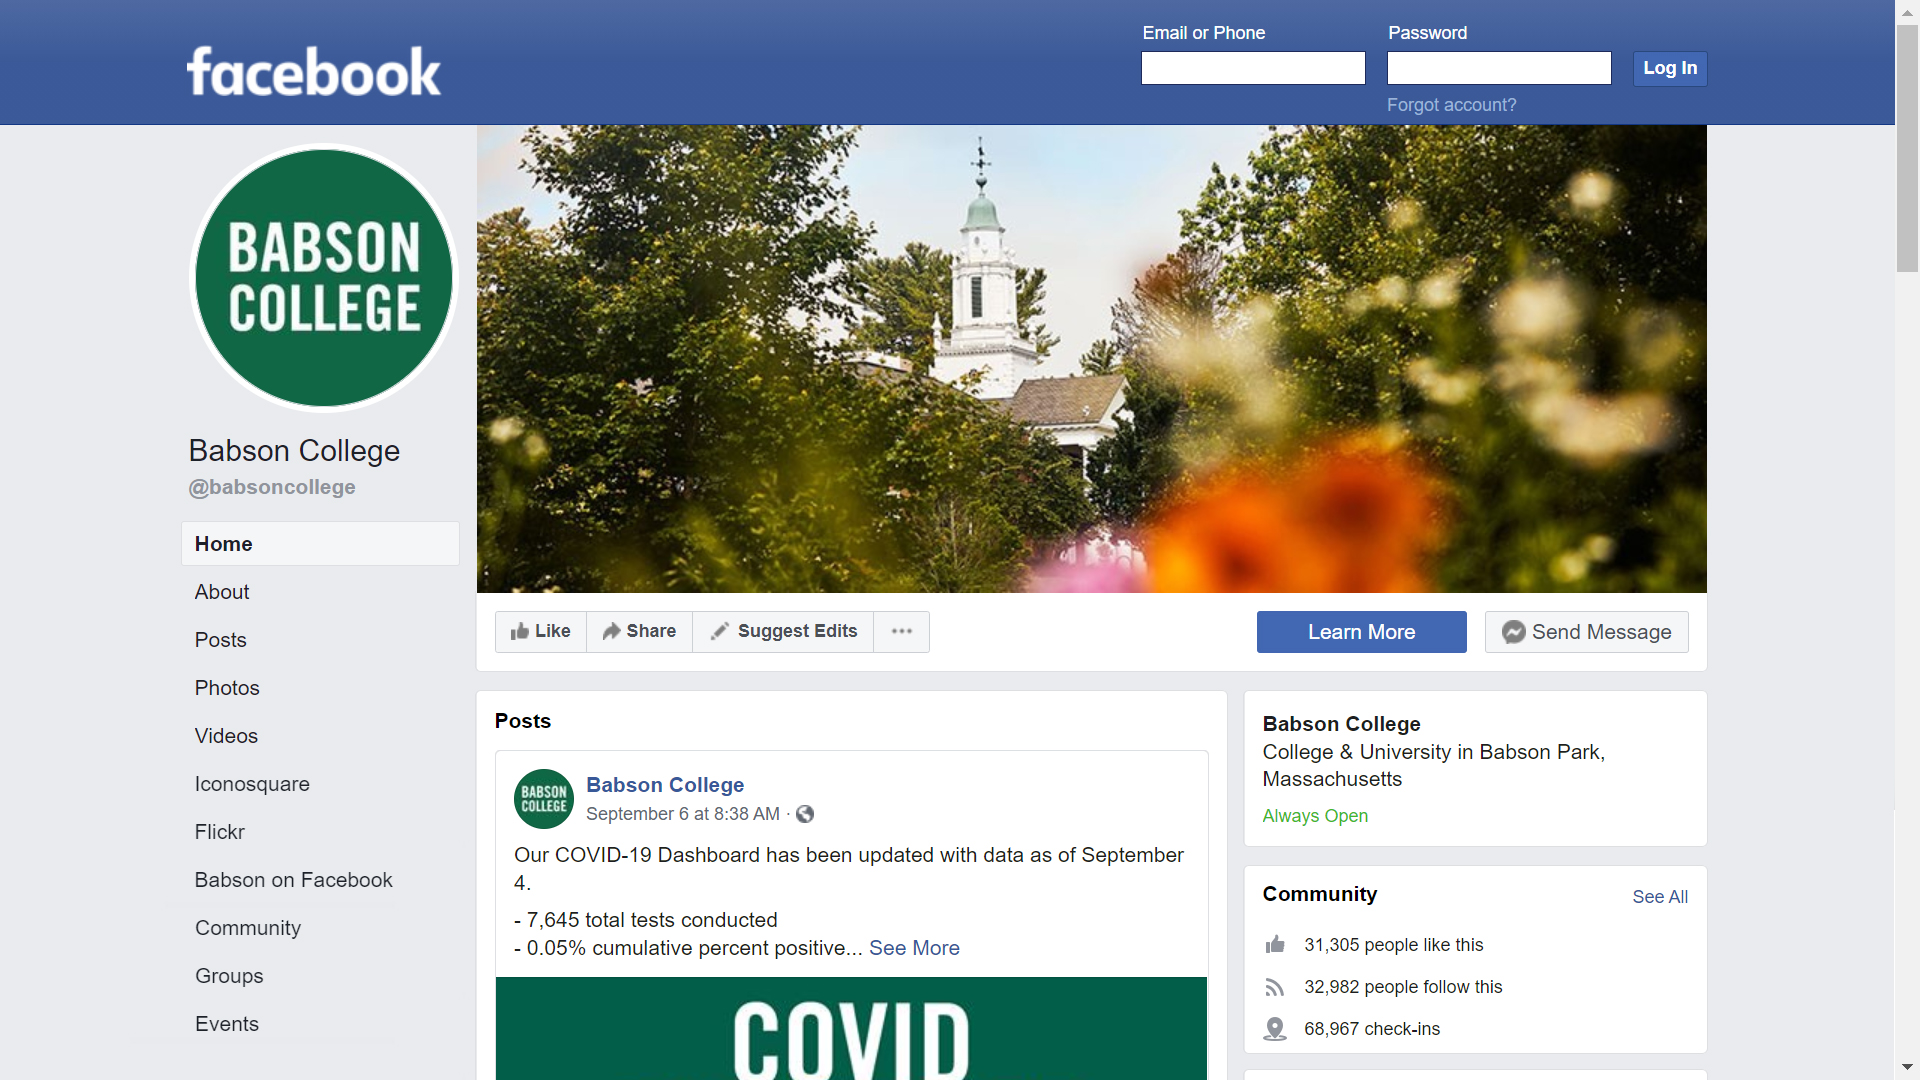 Babson College on Facebook